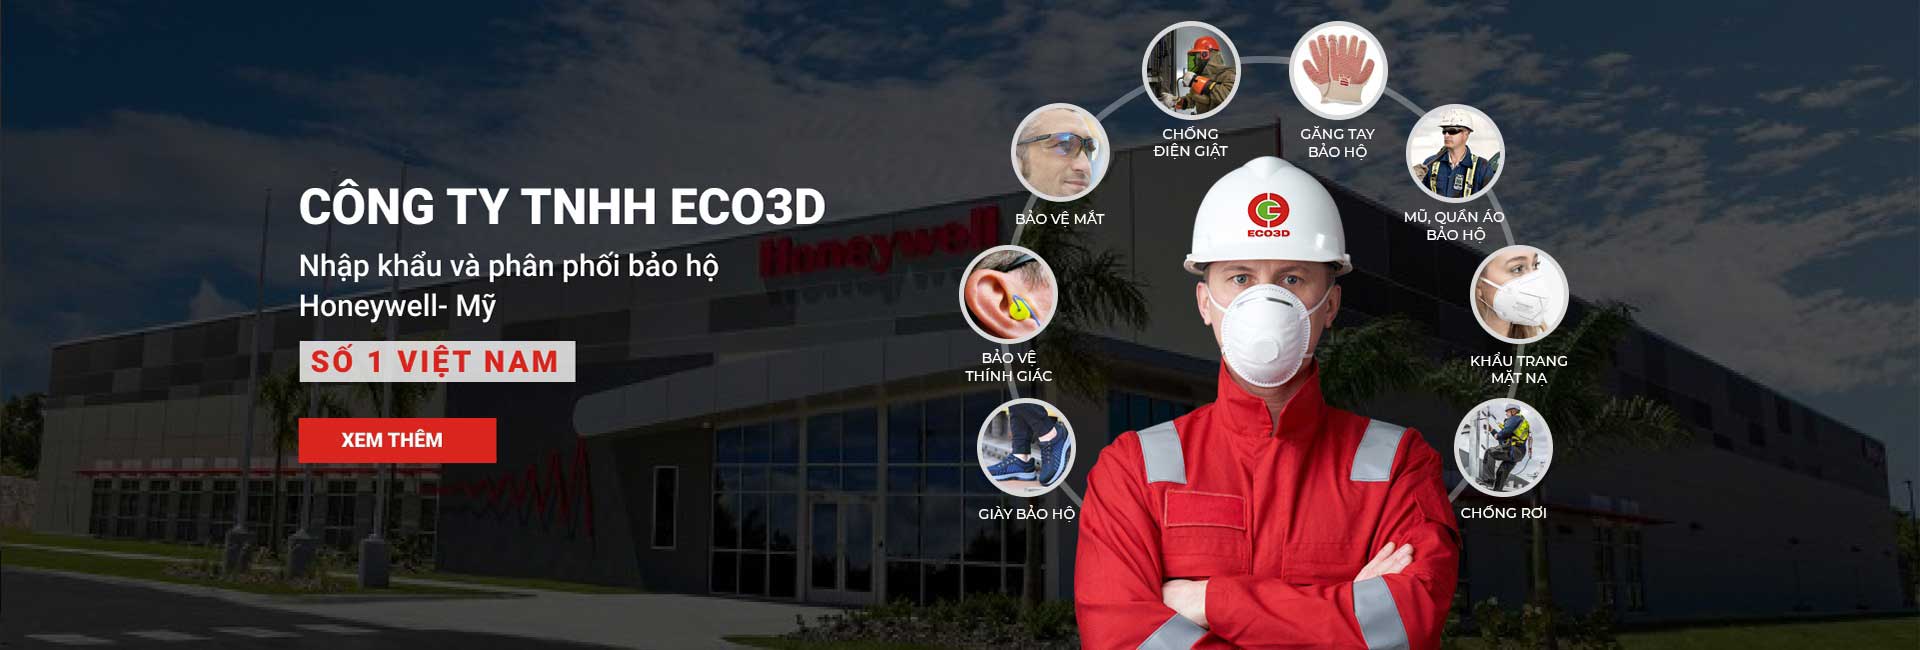 Công Ty TNHH EOC3D | ECO3D SAFETY